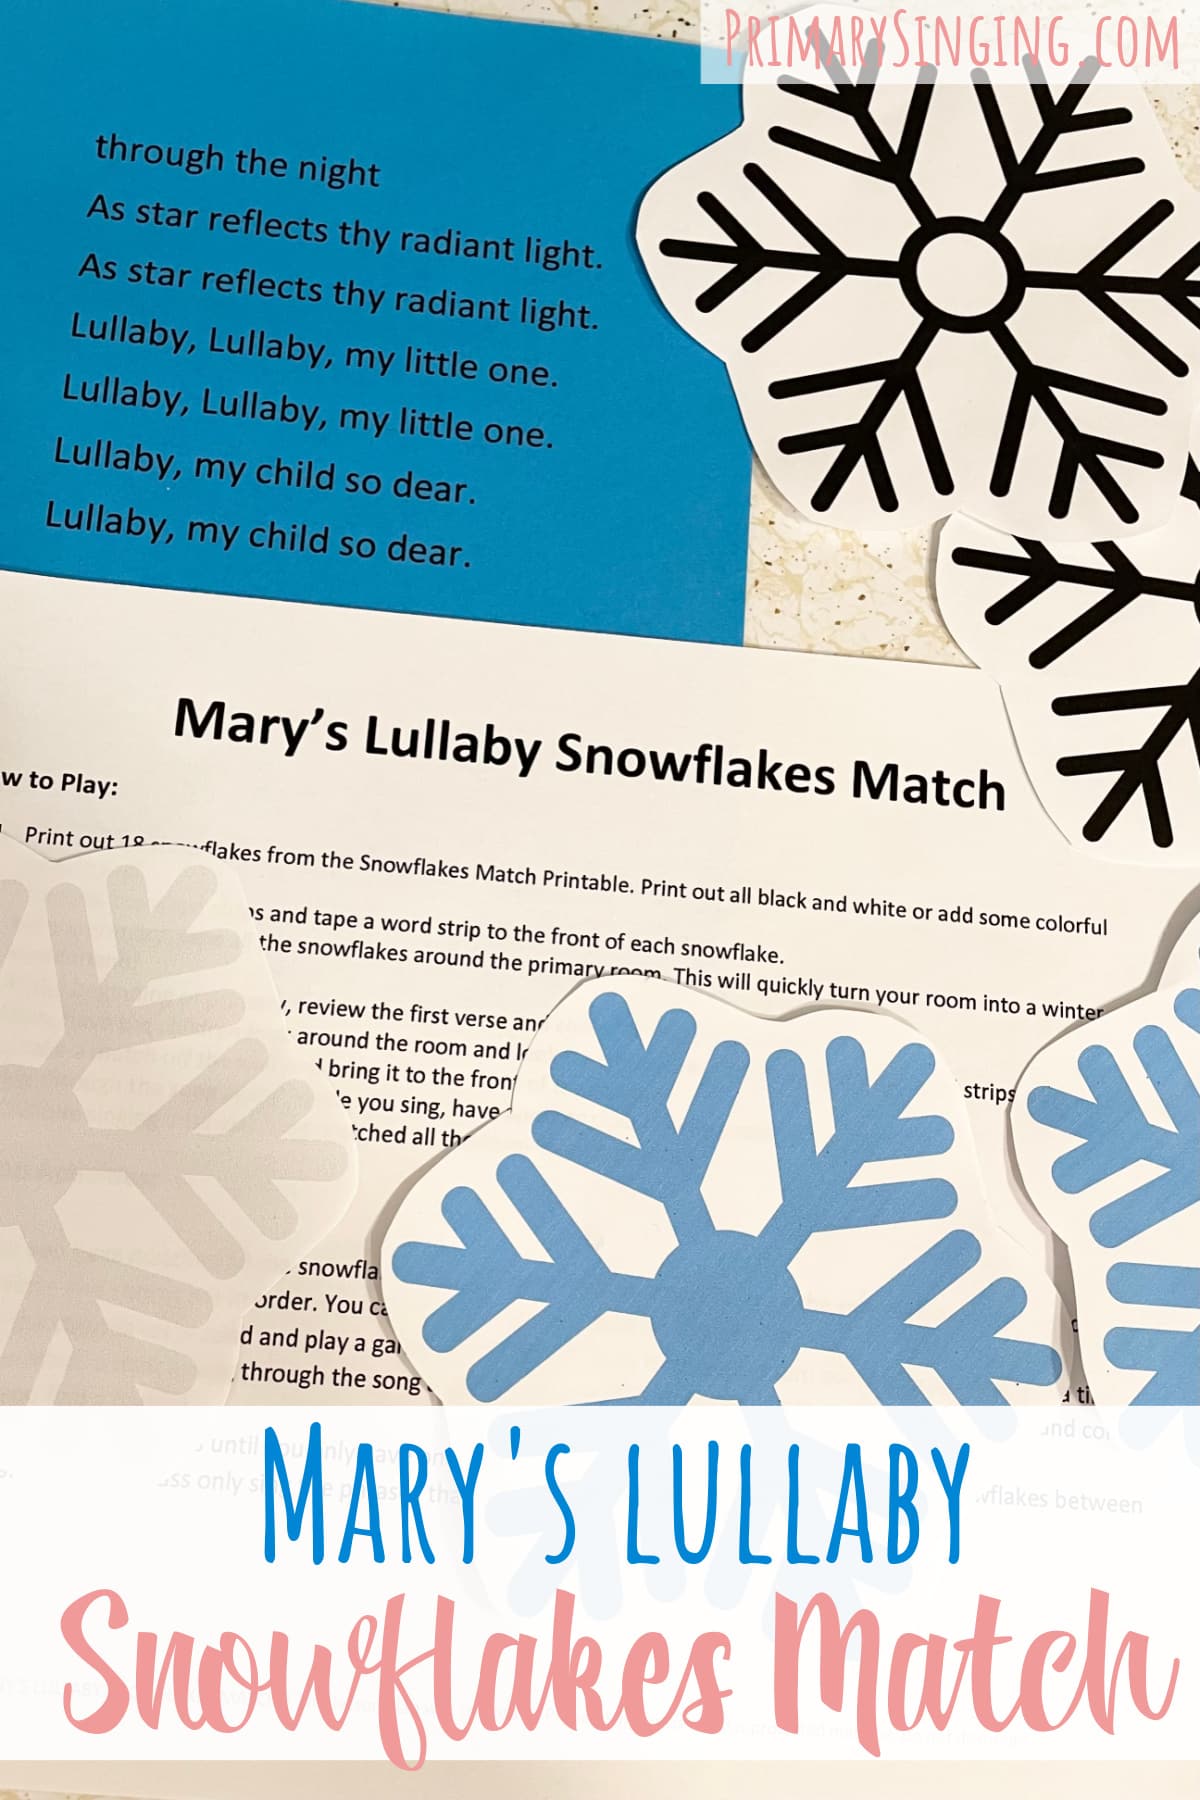 Mary's Lullaby Snowflakes Match Easy ideas for Music Leaders Marys Lullaby Snowflakes Match